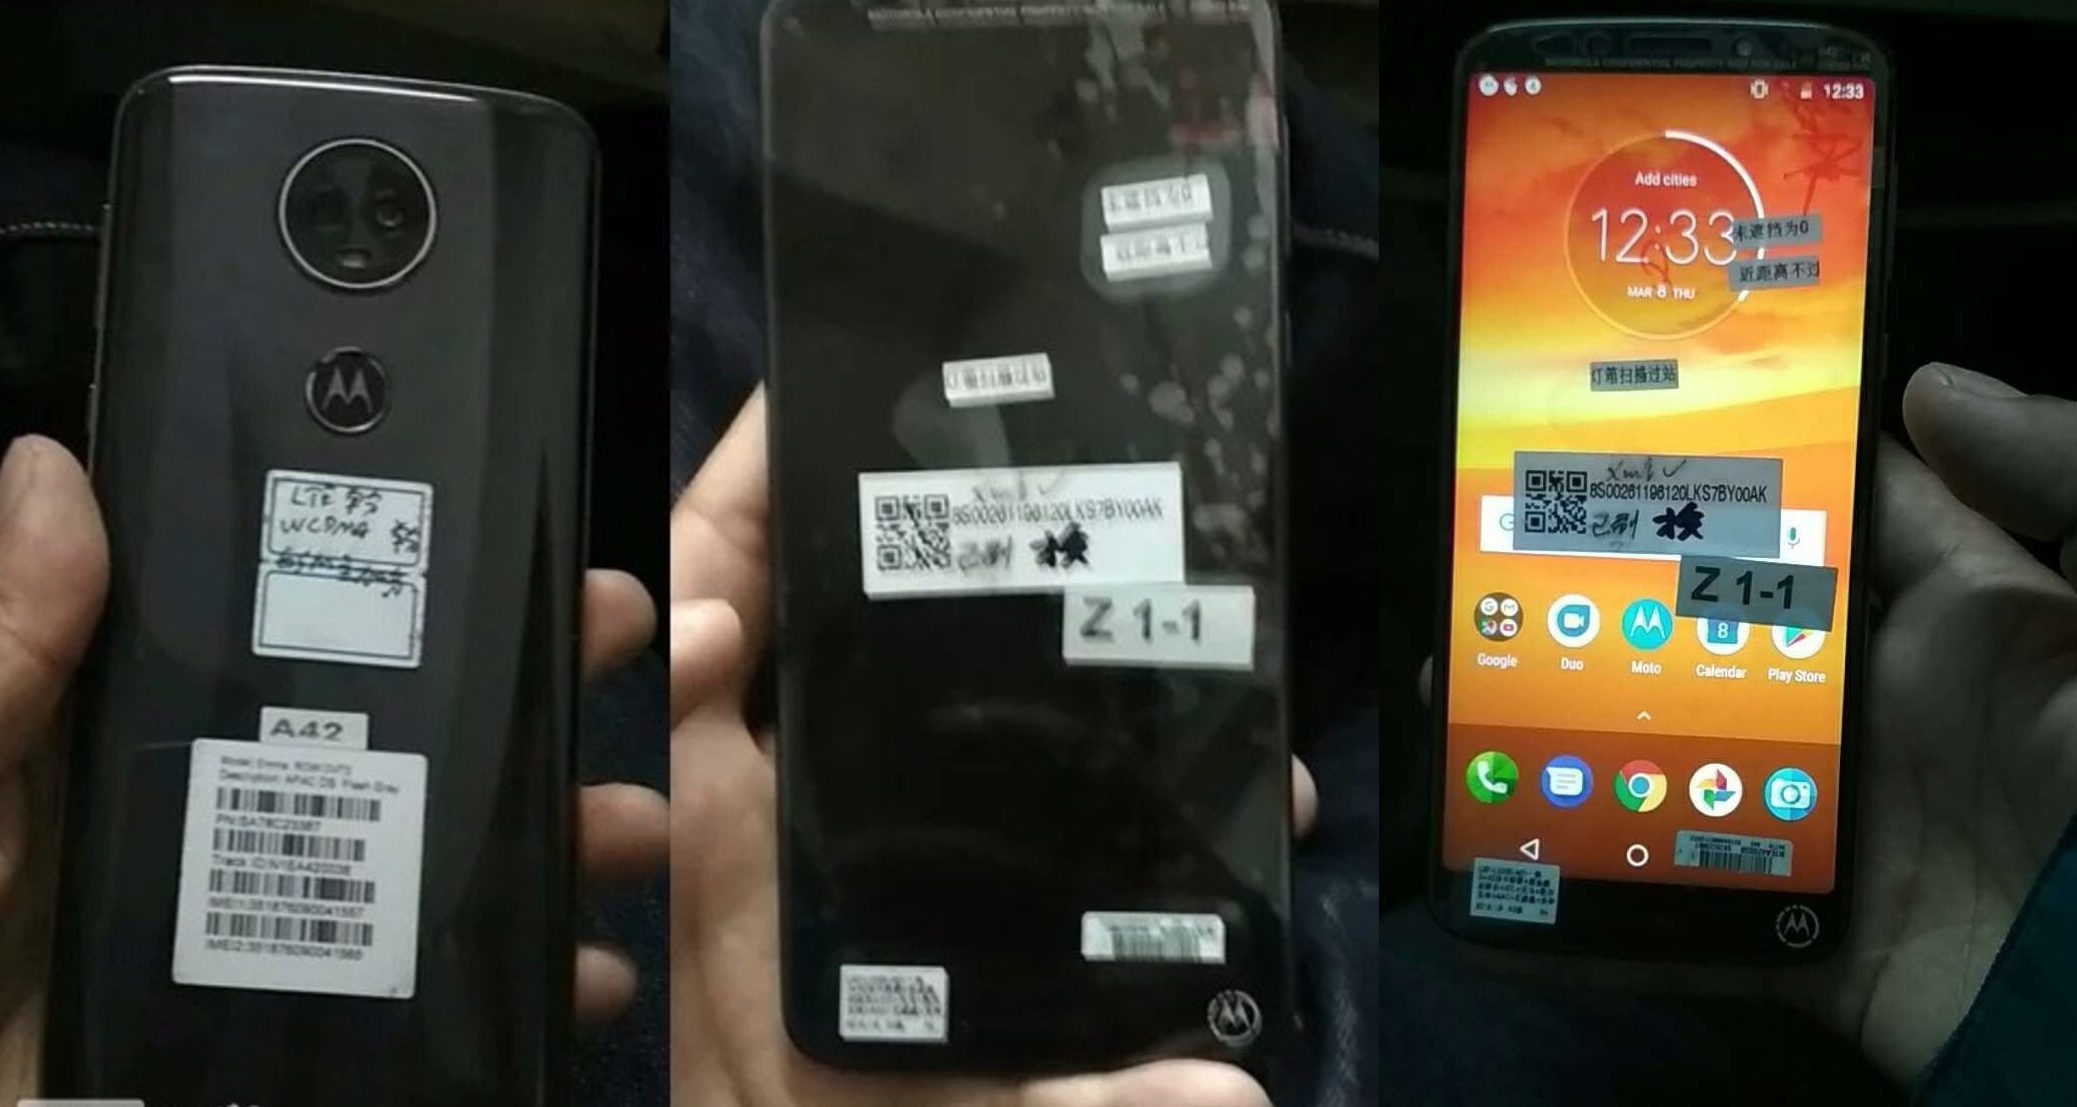 Moto E5 Plus leaked in images